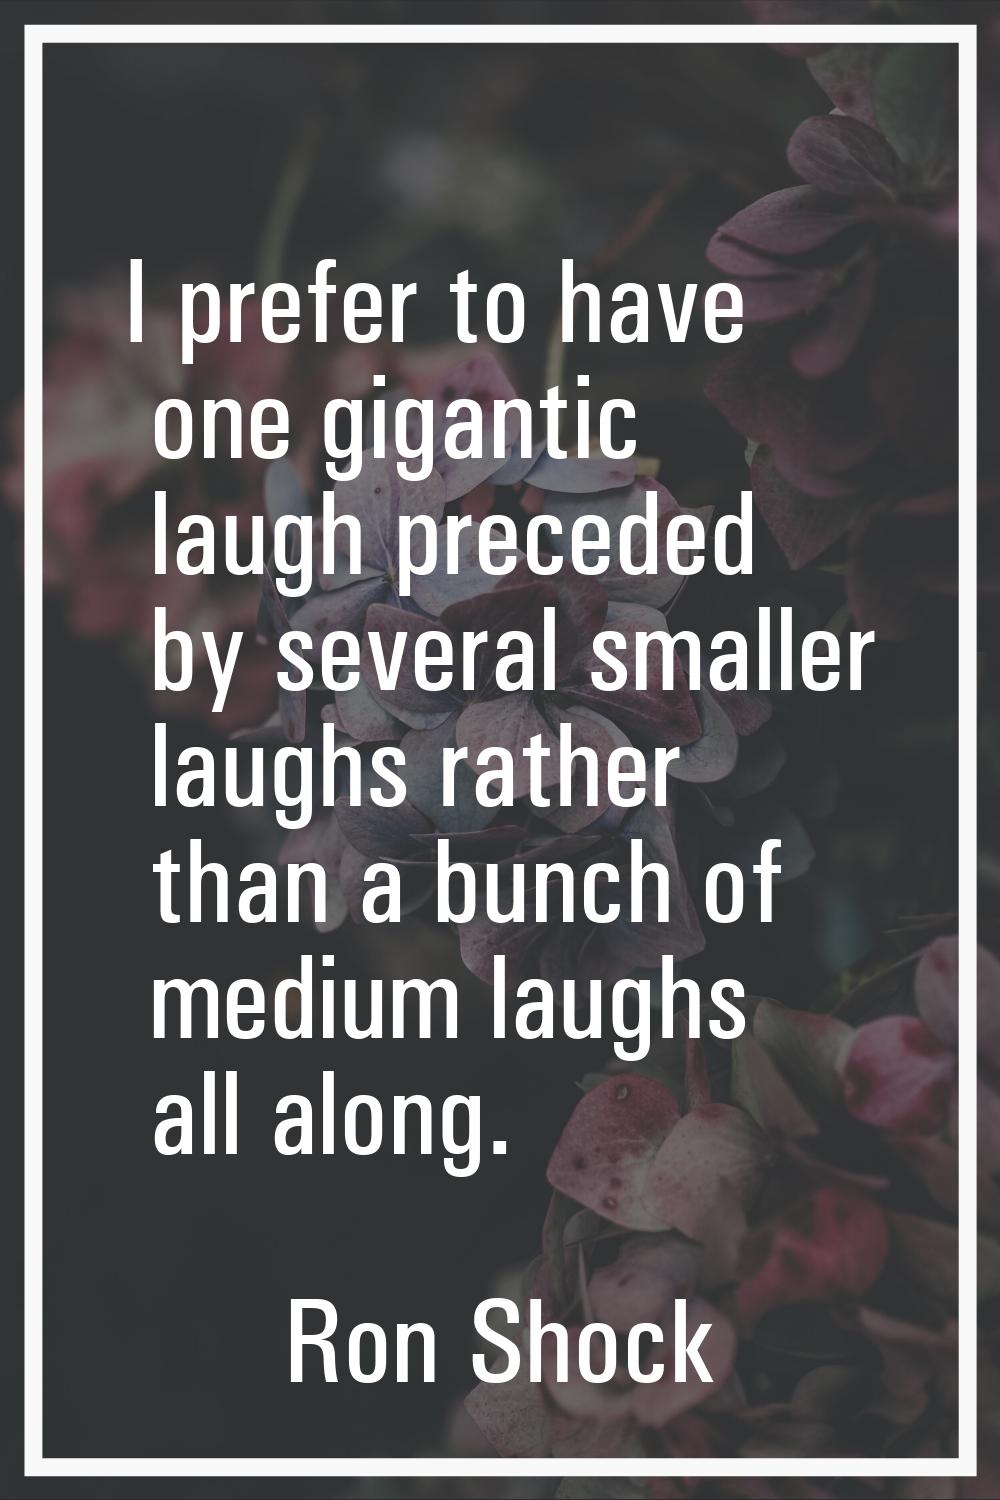 I prefer to have one gigantic laugh preceded by several smaller laughs rather than a bunch of mediu